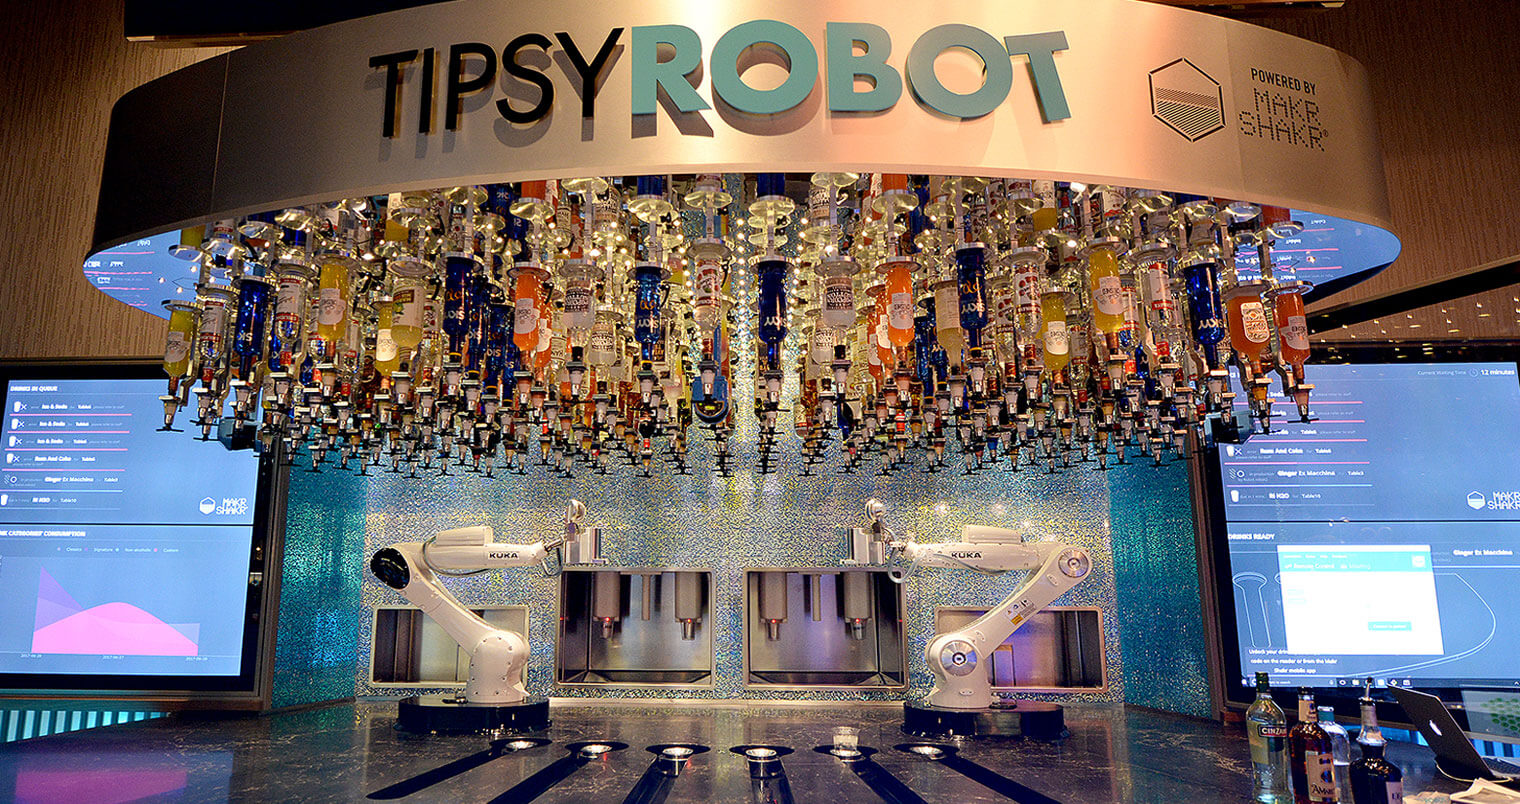 World's First Land-Based Robotic Bar Invades Las Vegas, featured image